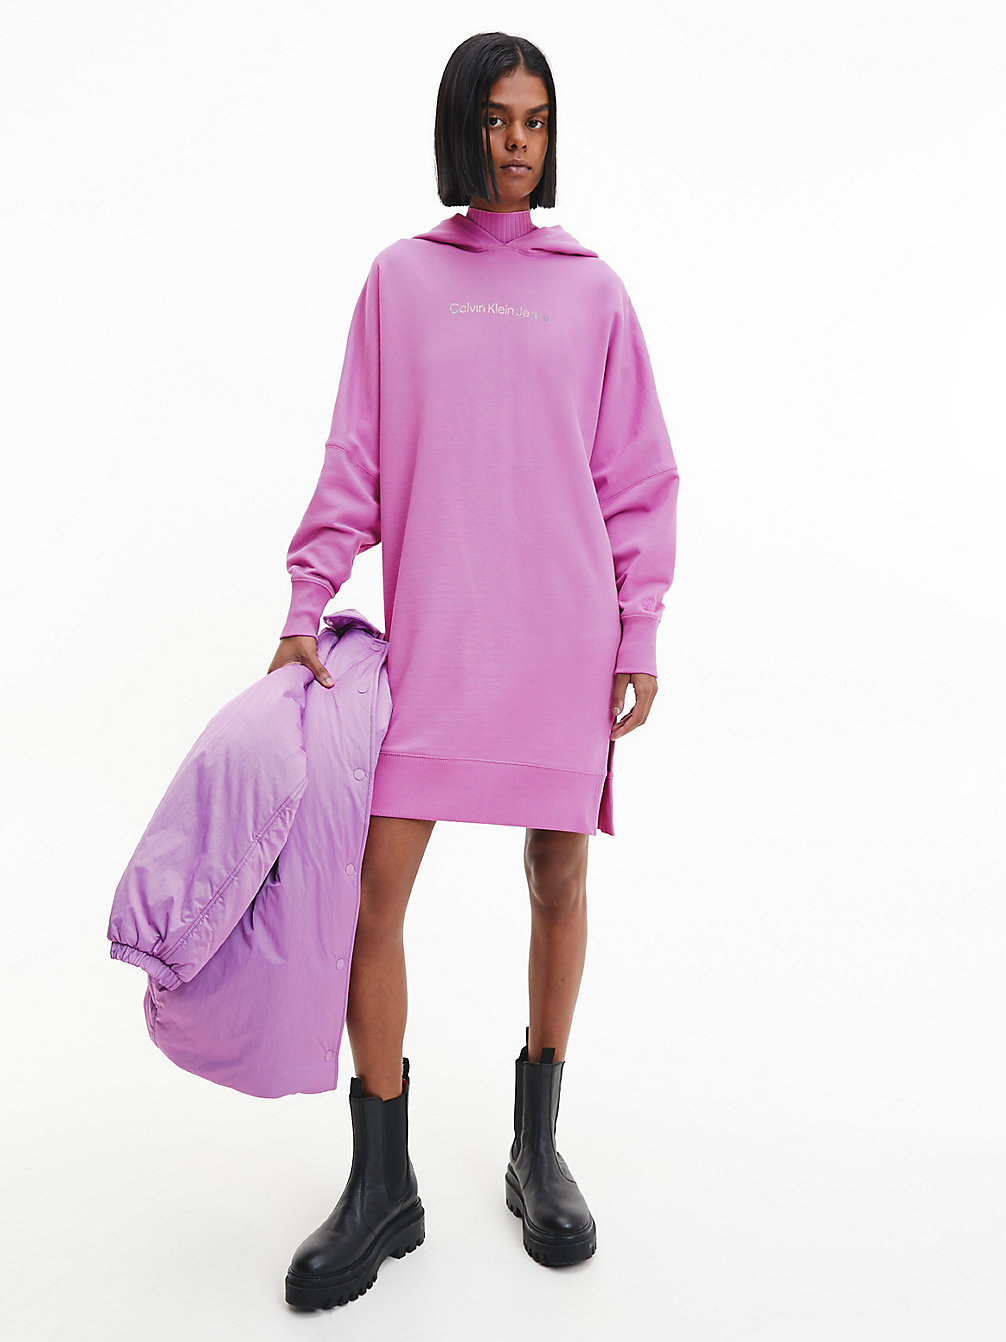 IRIS ORCHID Robe Sweat Relaxed À Capuche undefined femmes Calvin Klein